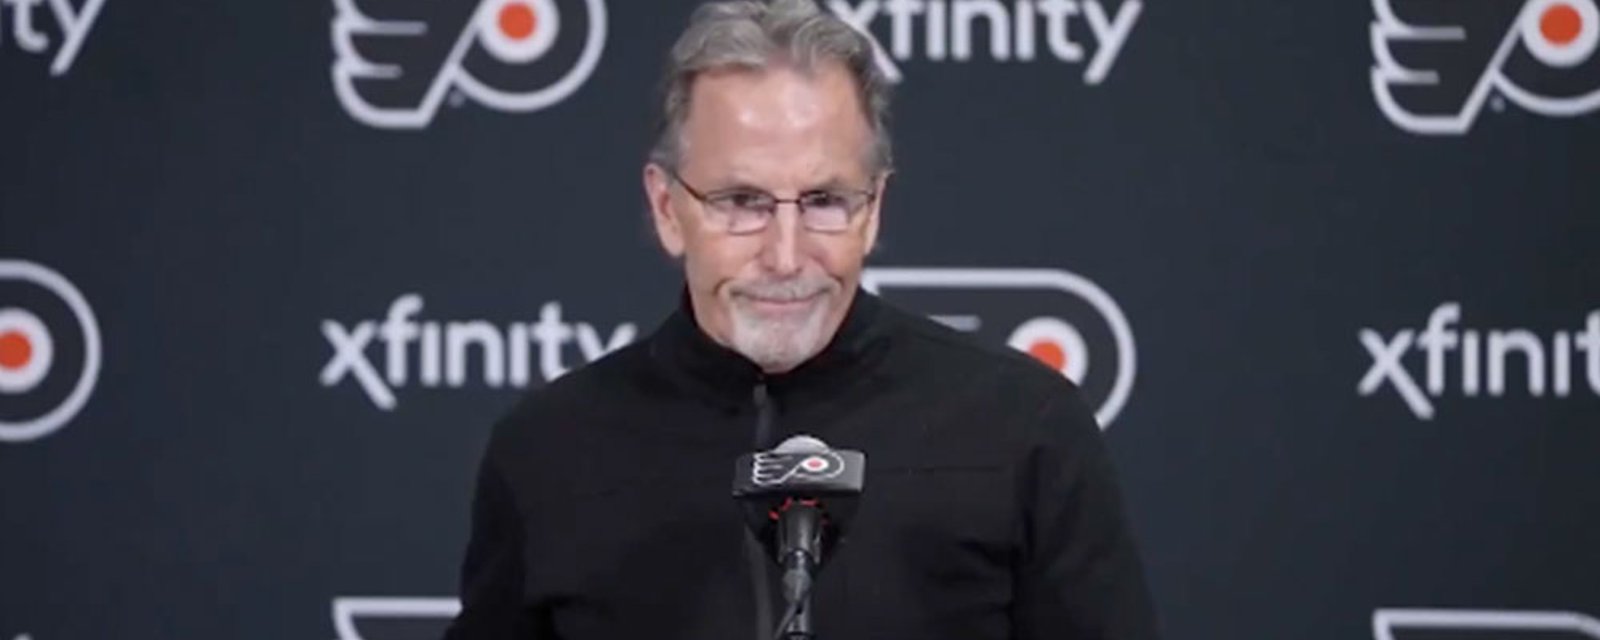 Tortorella to Cutter Gauthier: “We don't want you.”